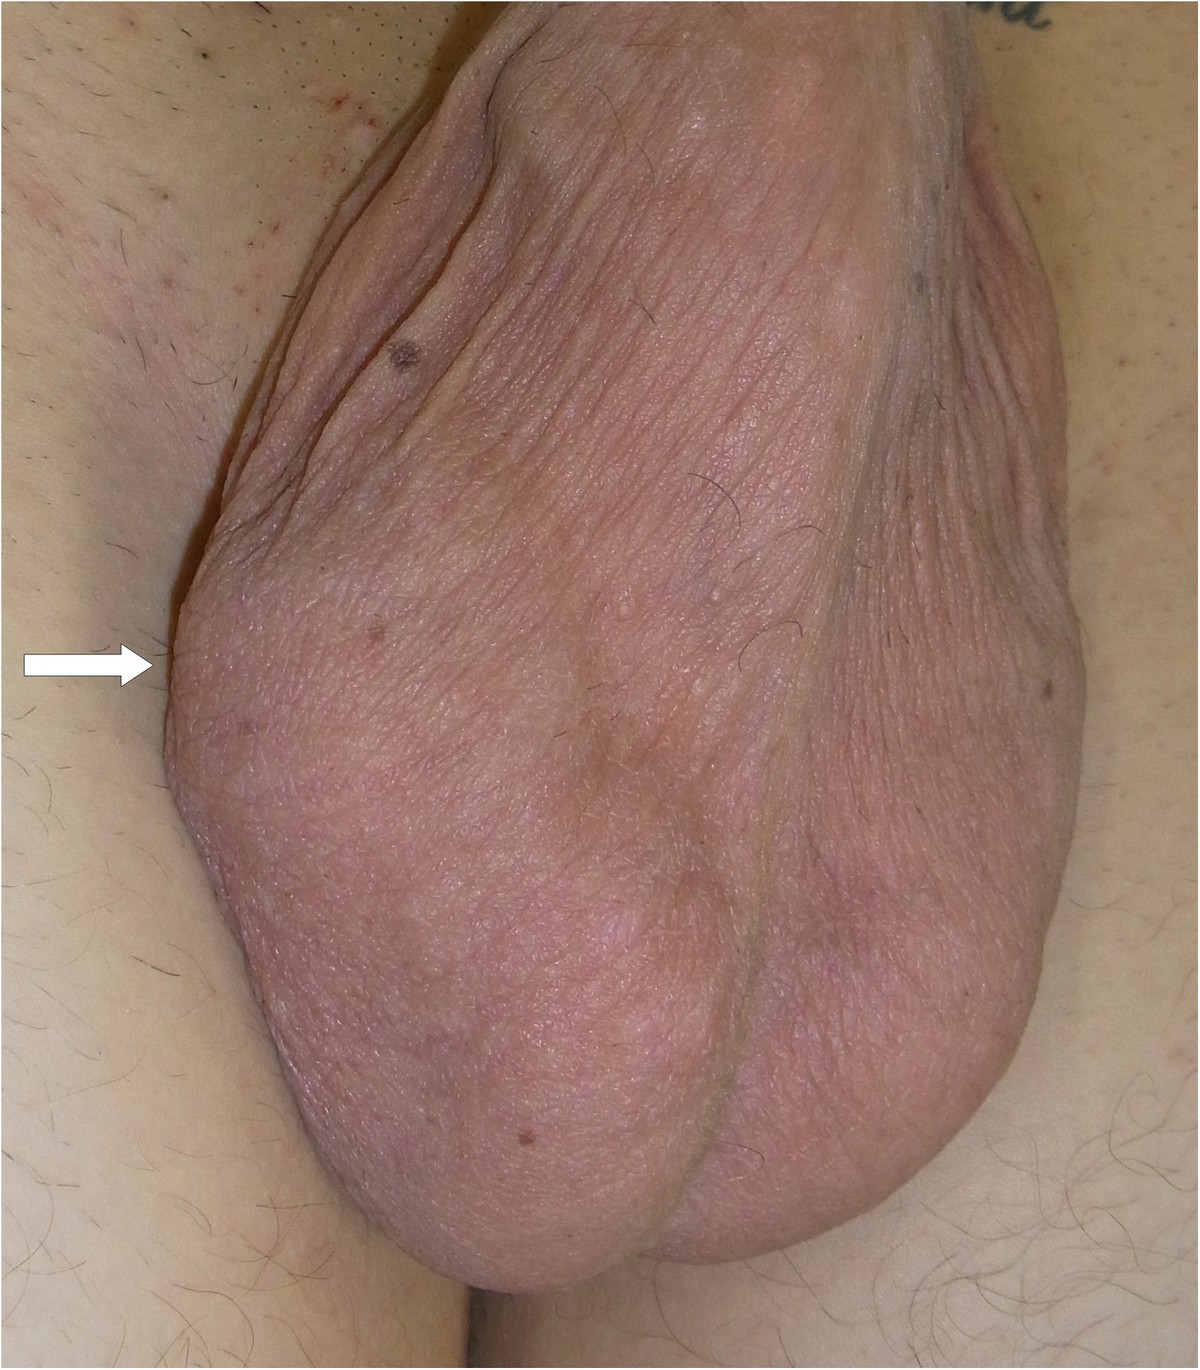 Clinical view: note the intrascrotal mass located cephalad to the right tes...